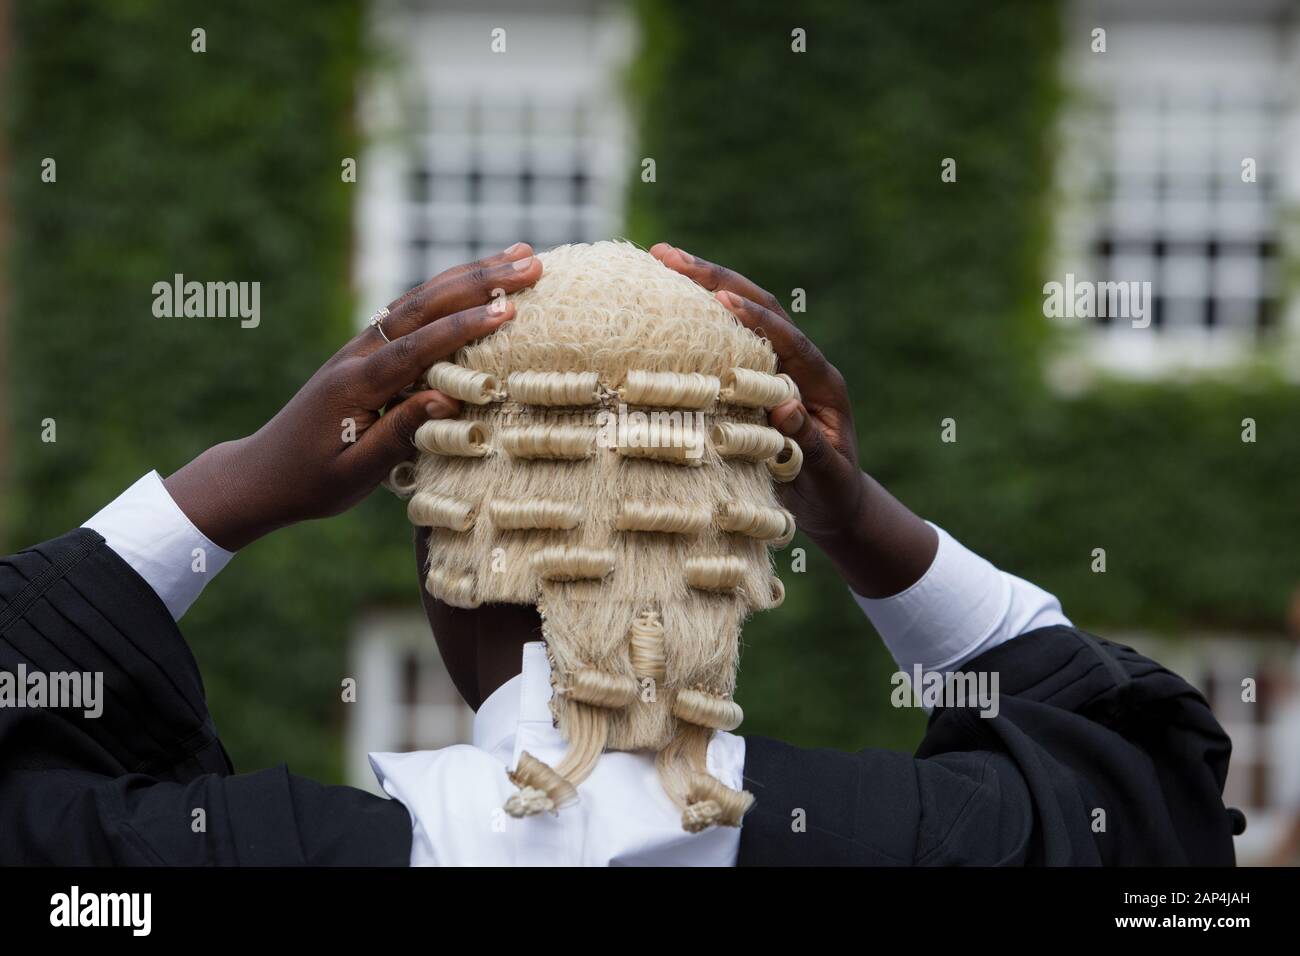 A man wearing a legal outfit holding a court wig, otherwiseknownas a peruke Stock Photo